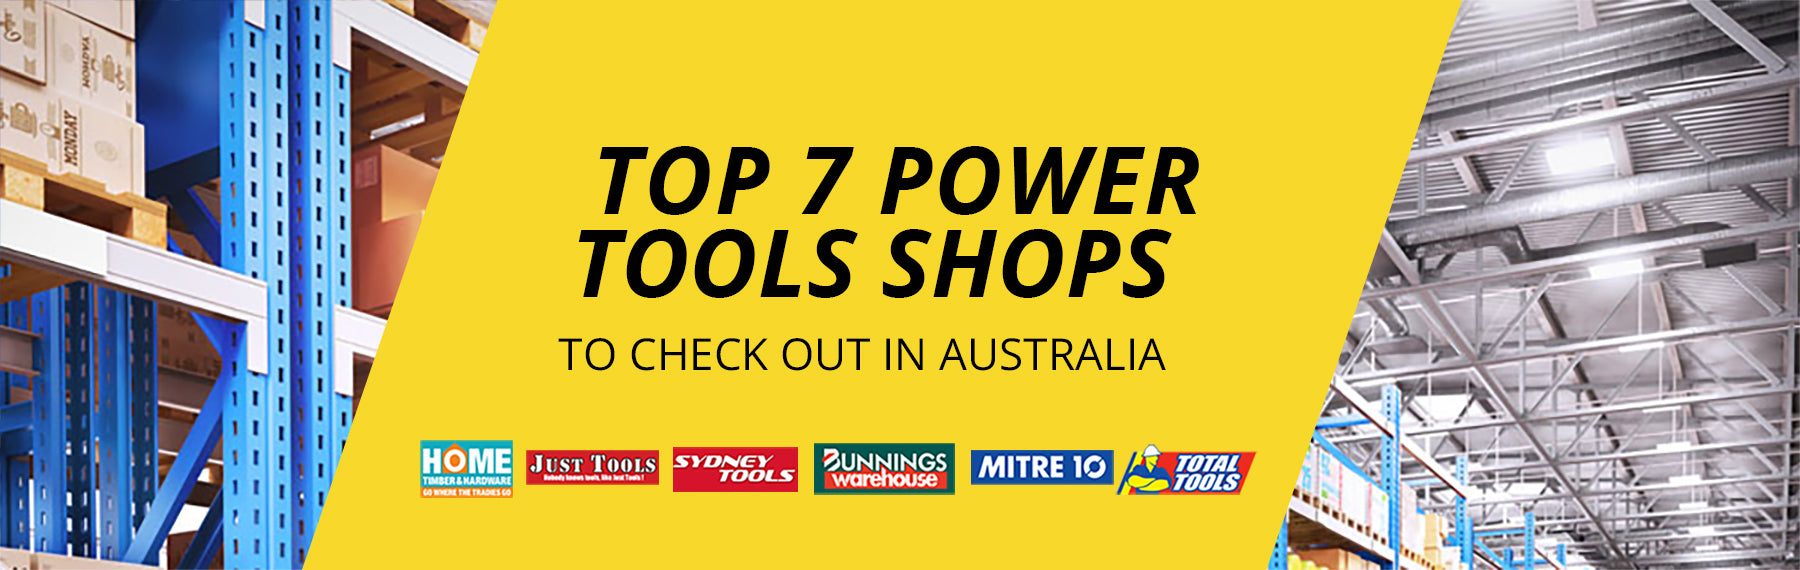 Top 7 Power Tools Shops To Check Out In Australia